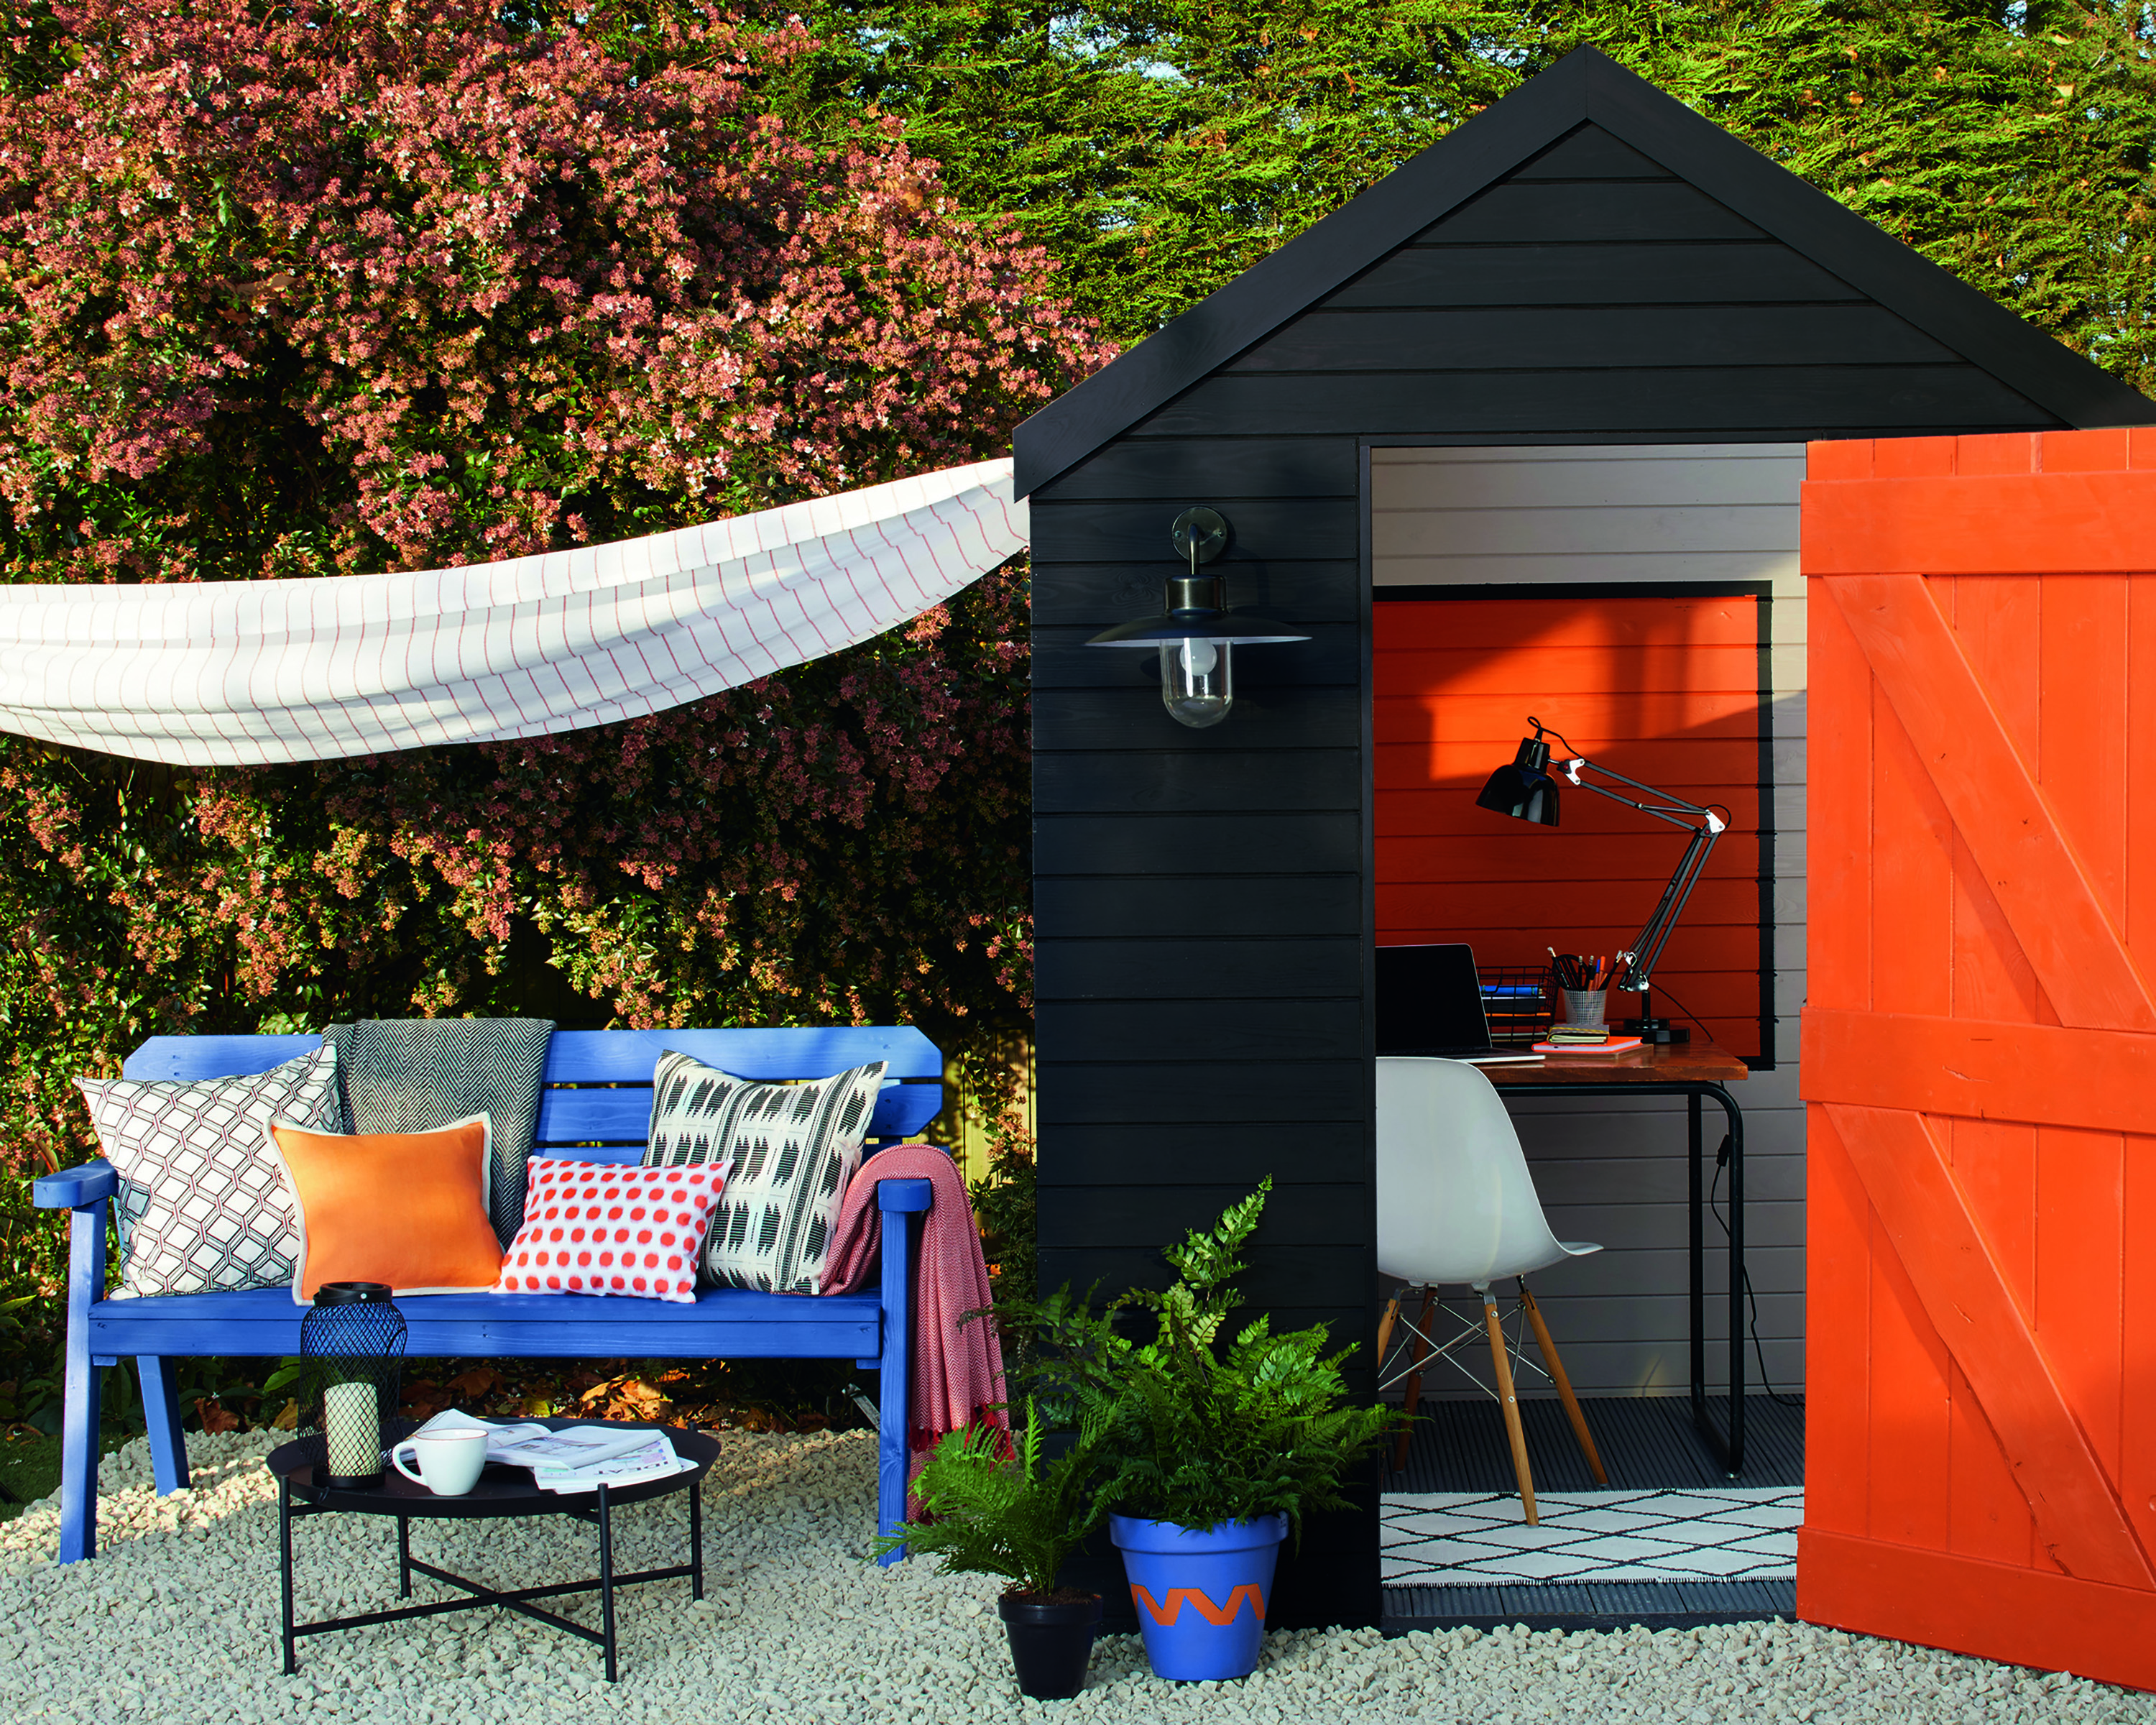 Winter garden ideas: painted shed